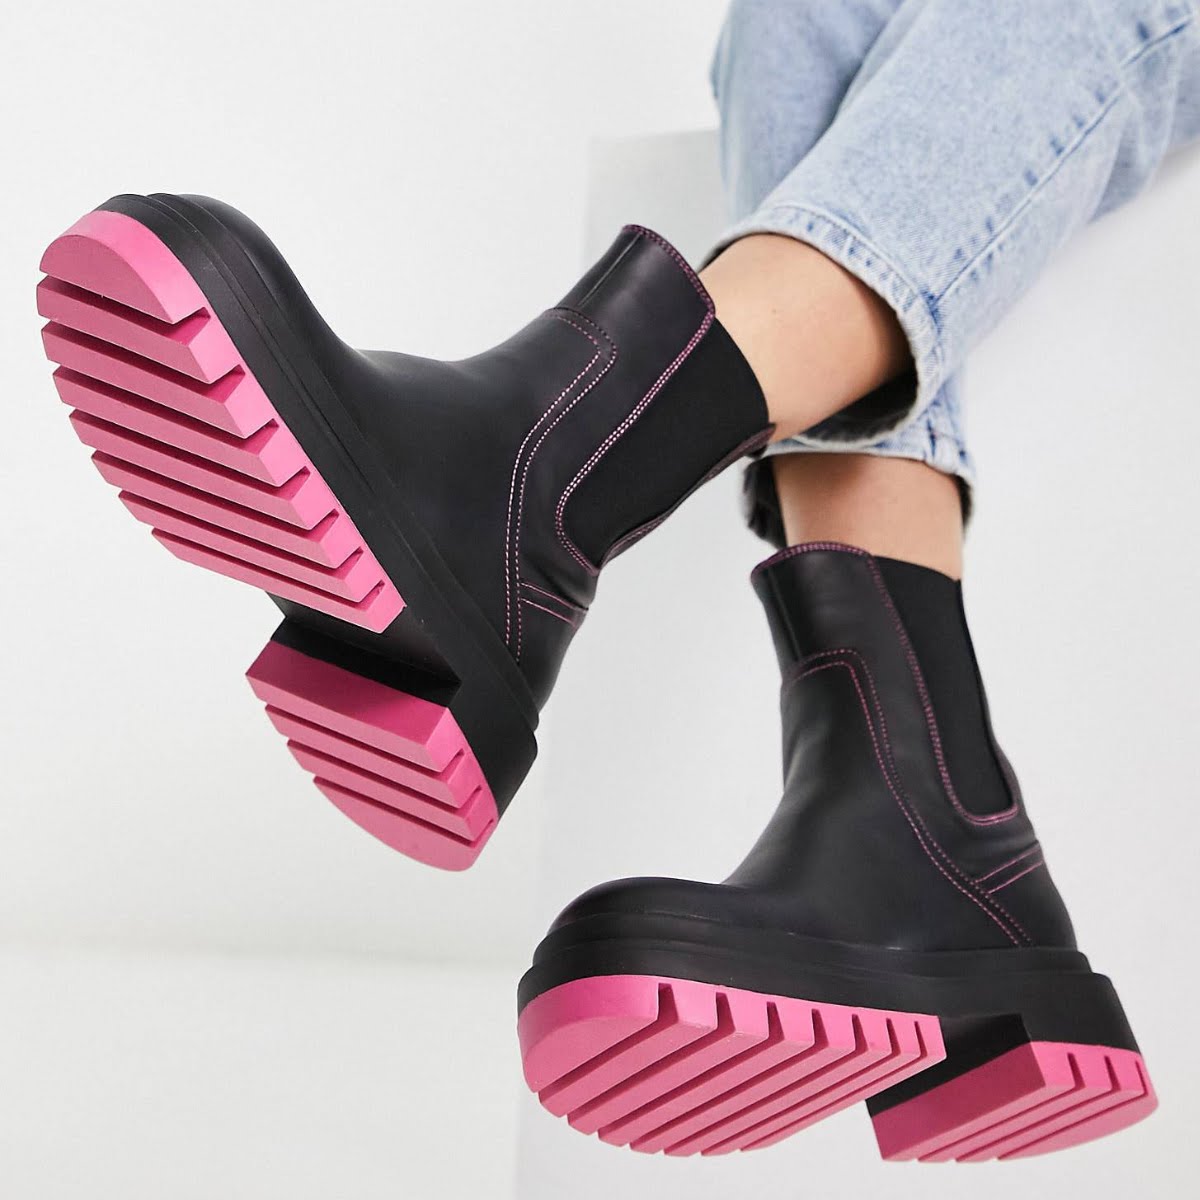 London Rebel Chelsea Boots in Black with Pink Sole, €32.50